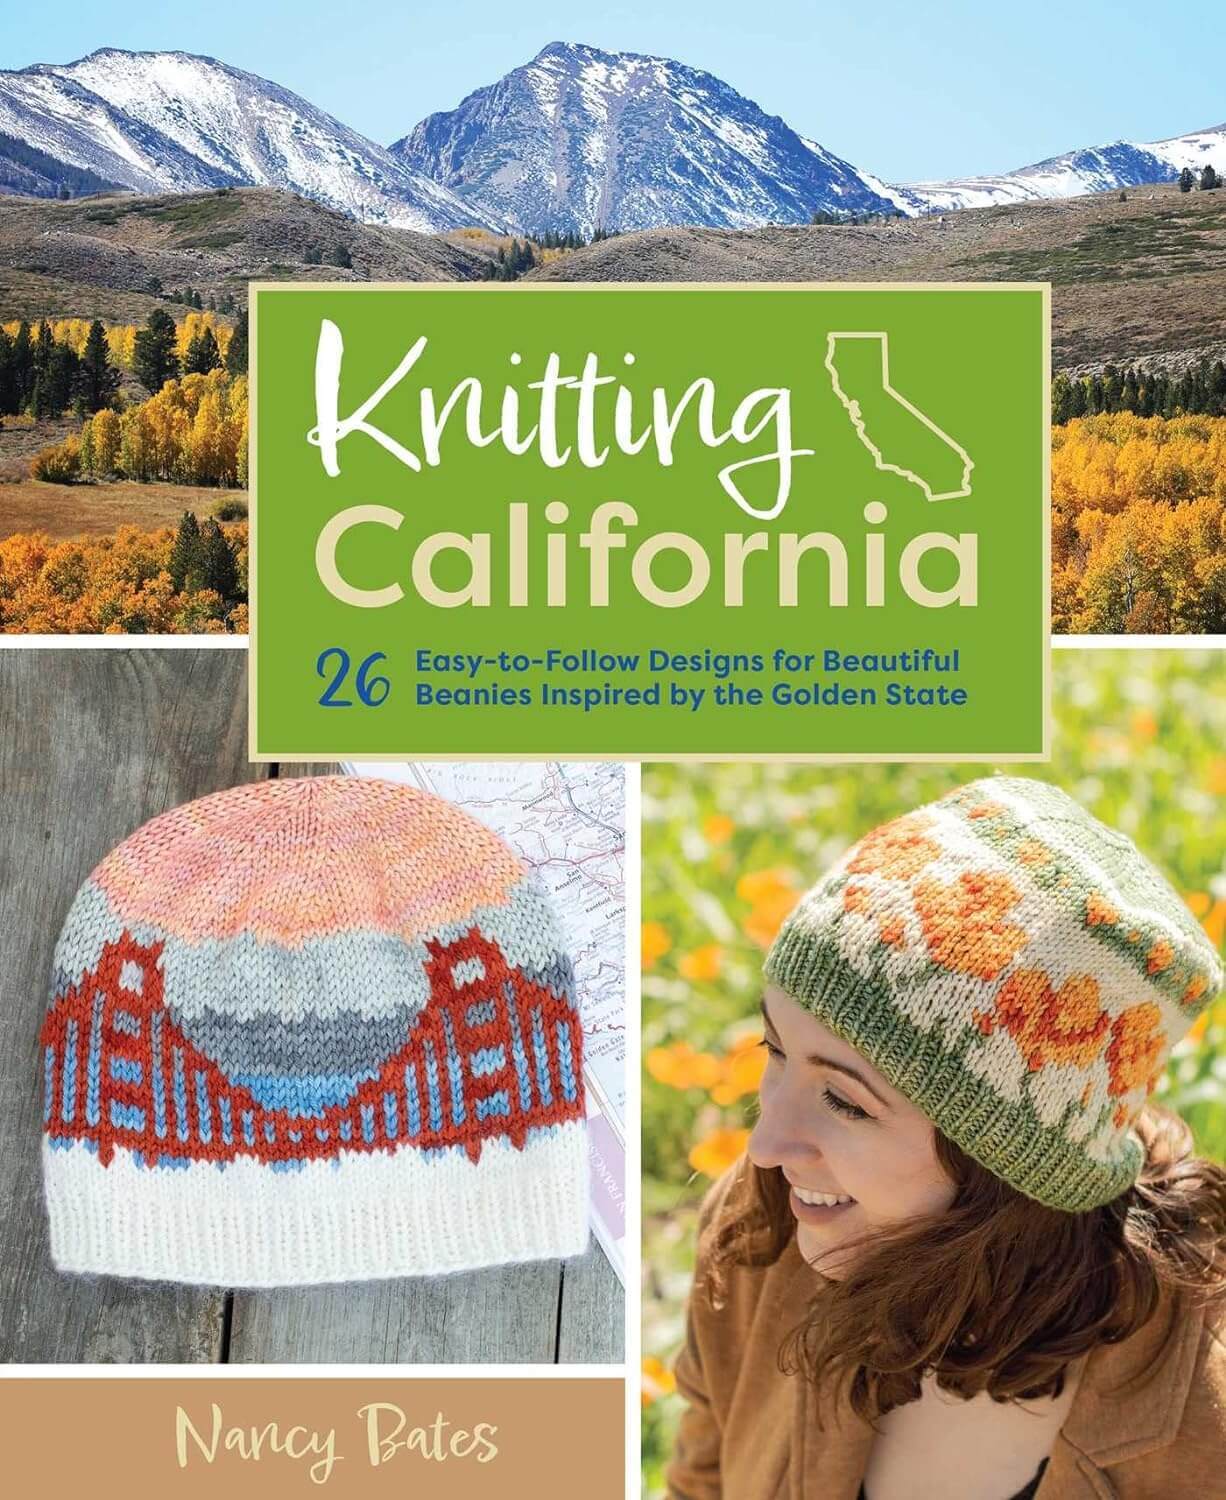 Knitting with Disney: 28 Official Patterns Inspired by Mickey Mouse, the  Little Mermaid, and More! (Disney Craft Books, Knitting Books, Book a book  by Tanis Gray